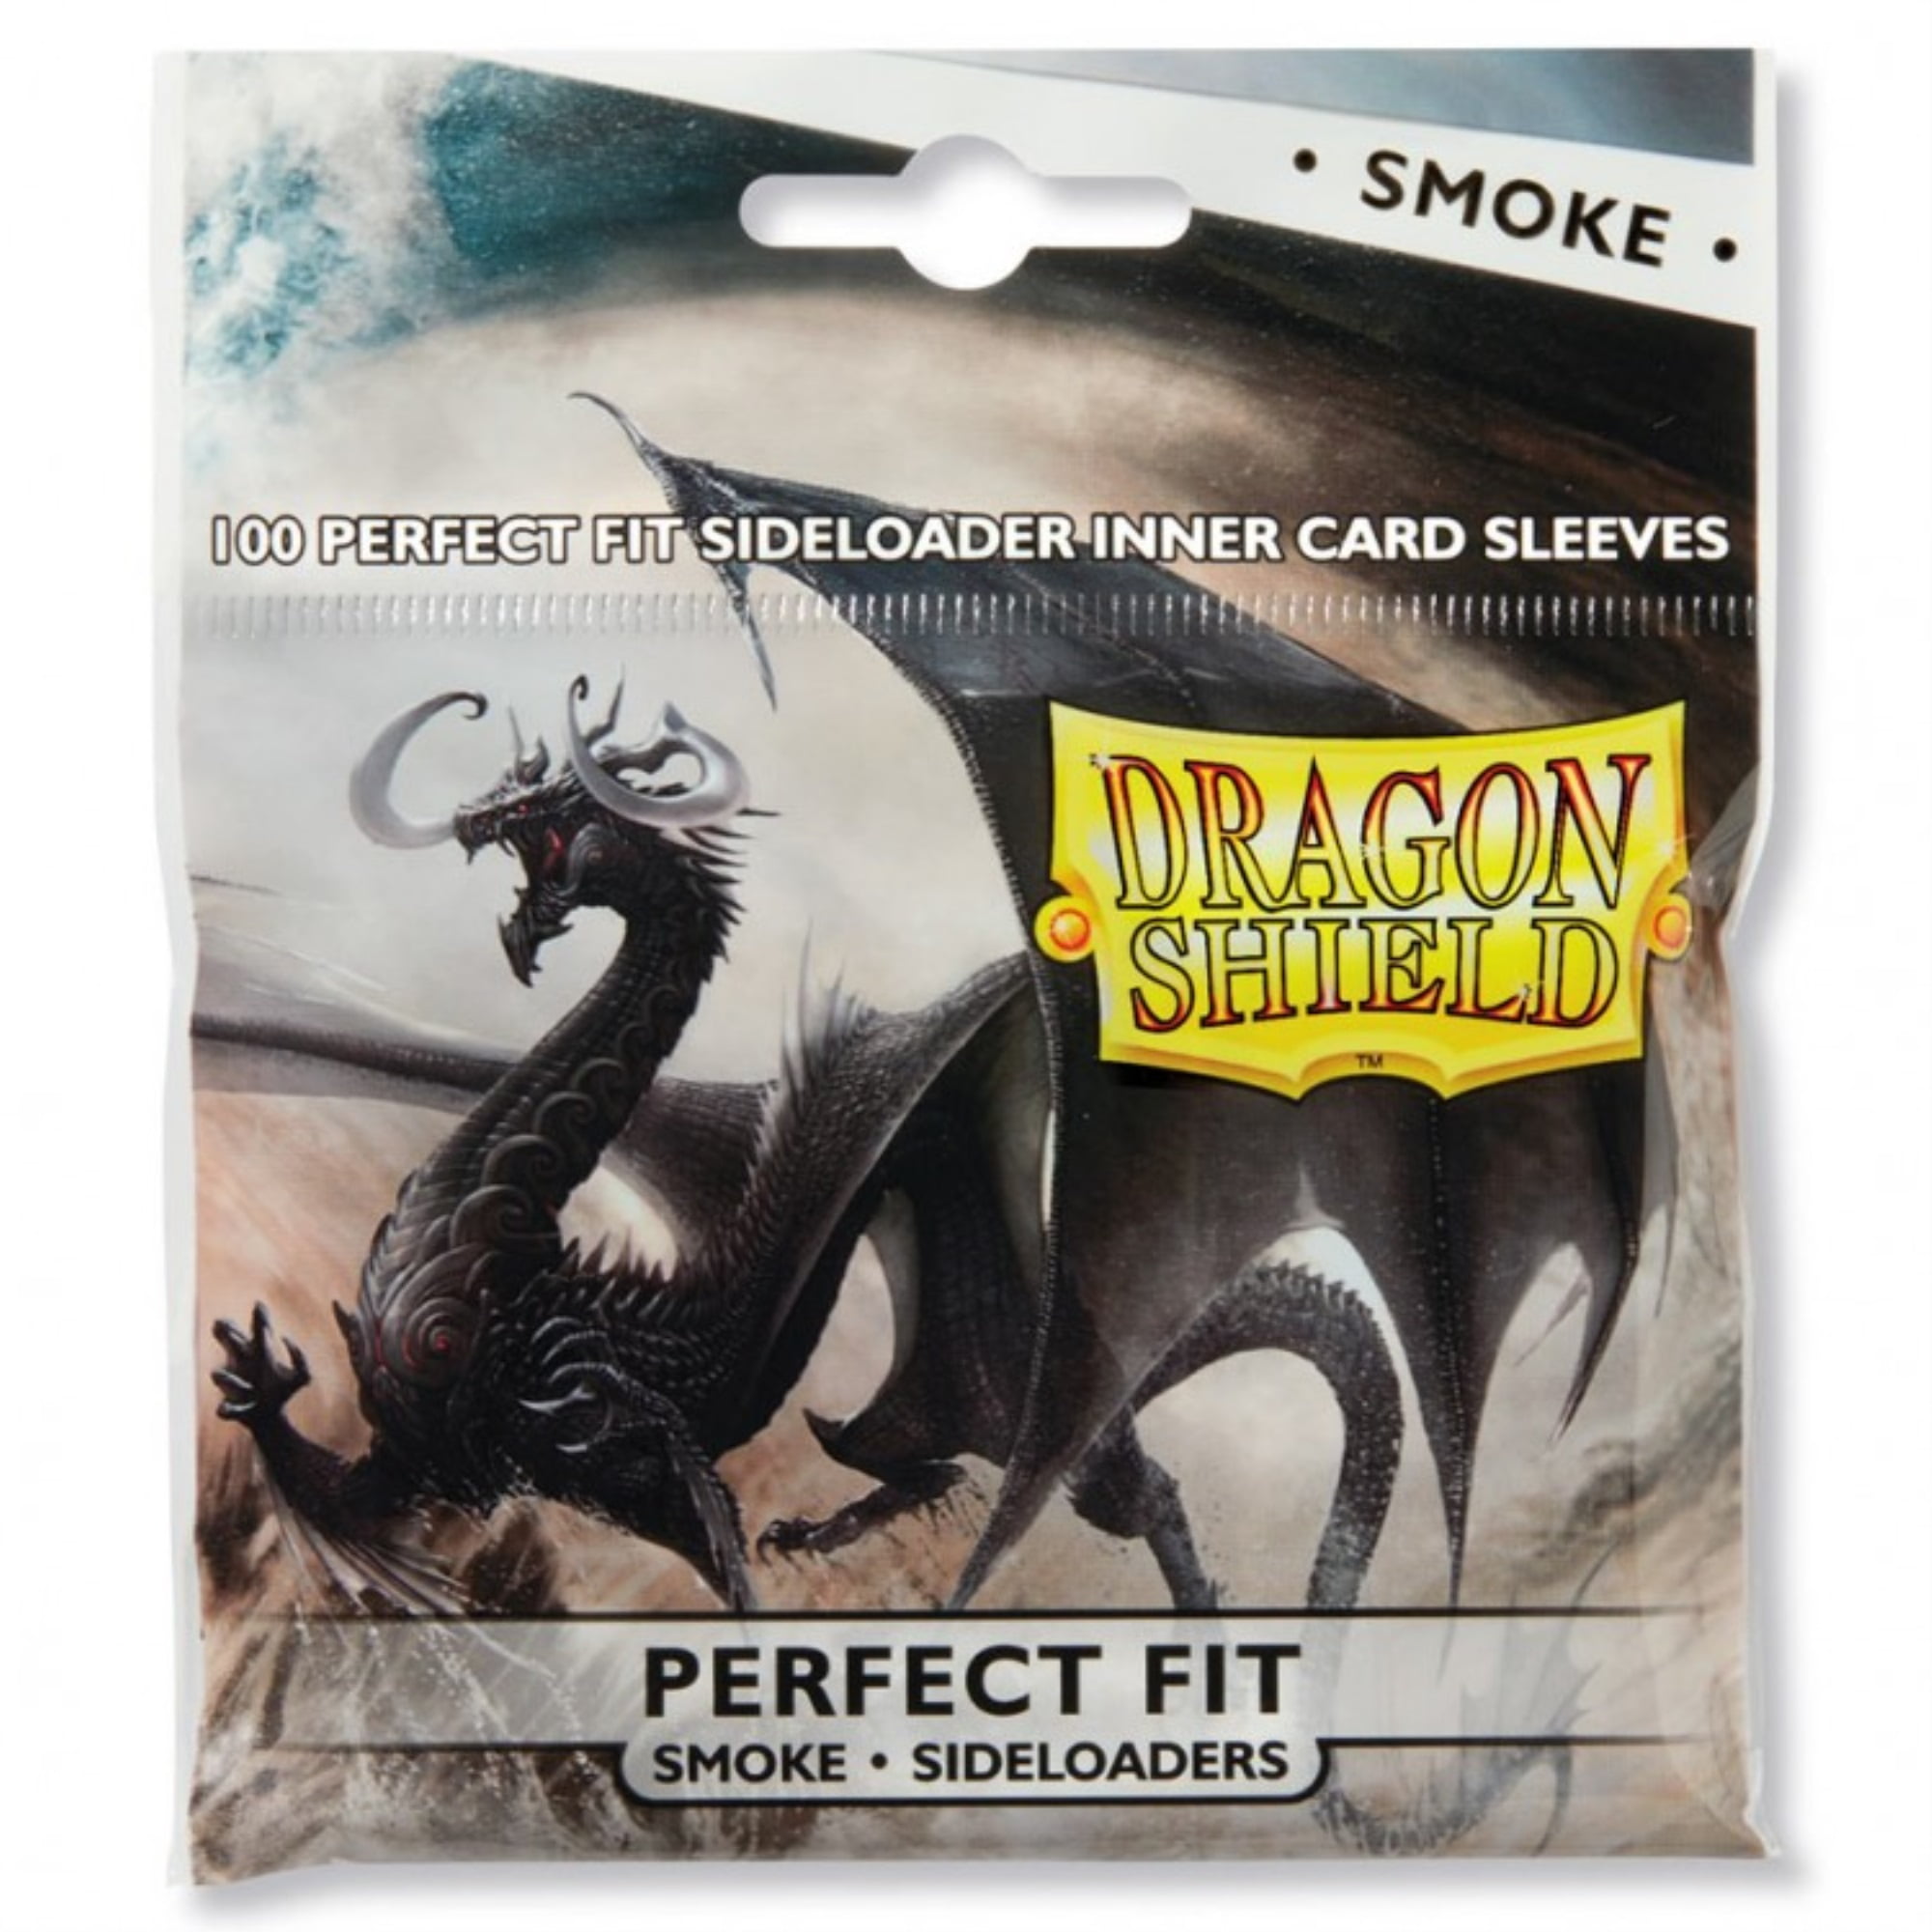 Atm13123 Dragon Shield Perfect Fit Side-loading Sleeves, Smoke - 100 Count